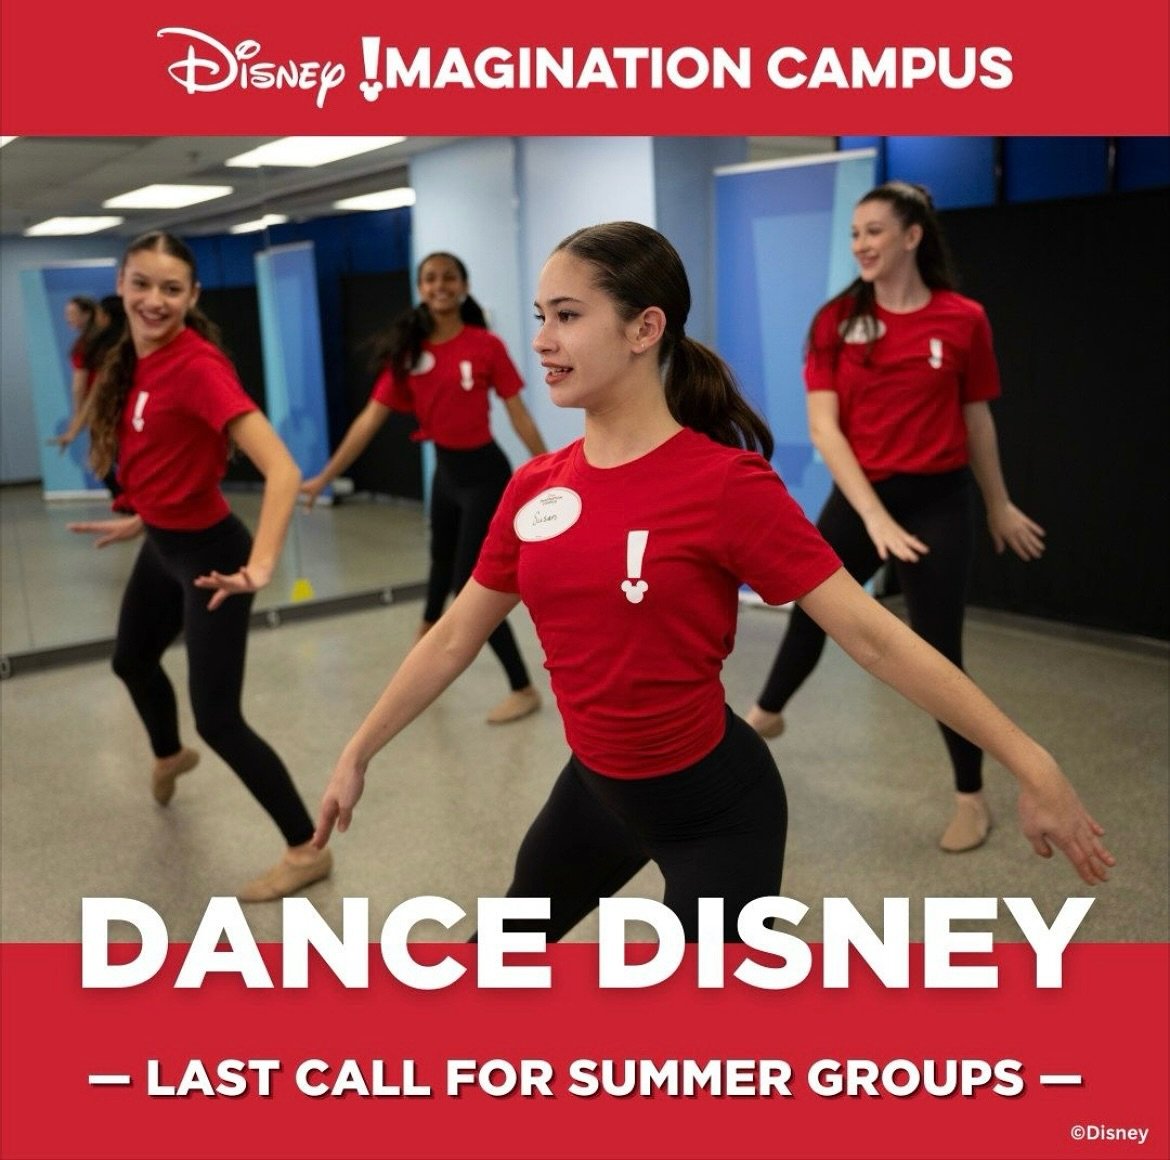 Such a fun shoot with @disneyimaginationcampus ❤️
.
.
#disney #disneystyle #disneyworld #disneyimaginationcampus #dancer #dancing #dancecompetition #disneyoutfit